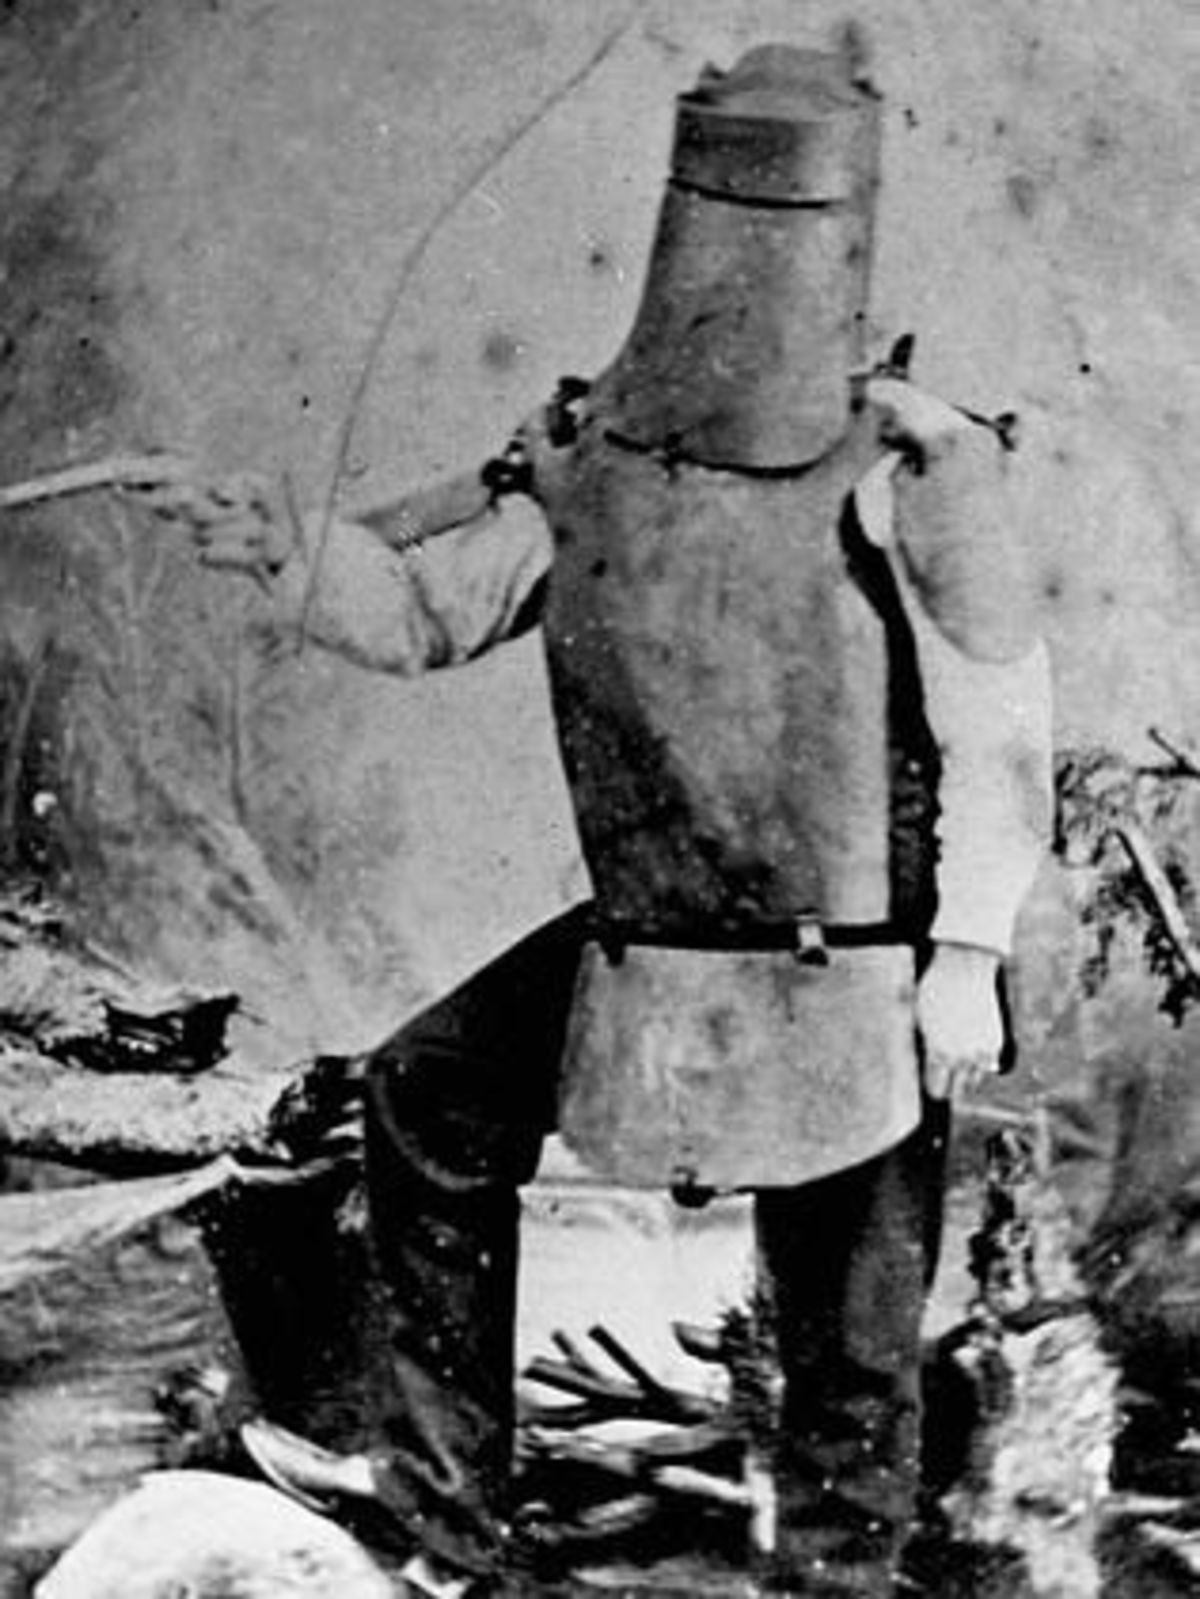 Histro tuwm. Ned Kelly was one hell of an australian who welded together a buncha metal into bulletproof plate armor to rob banks with like some crazy ass mad m